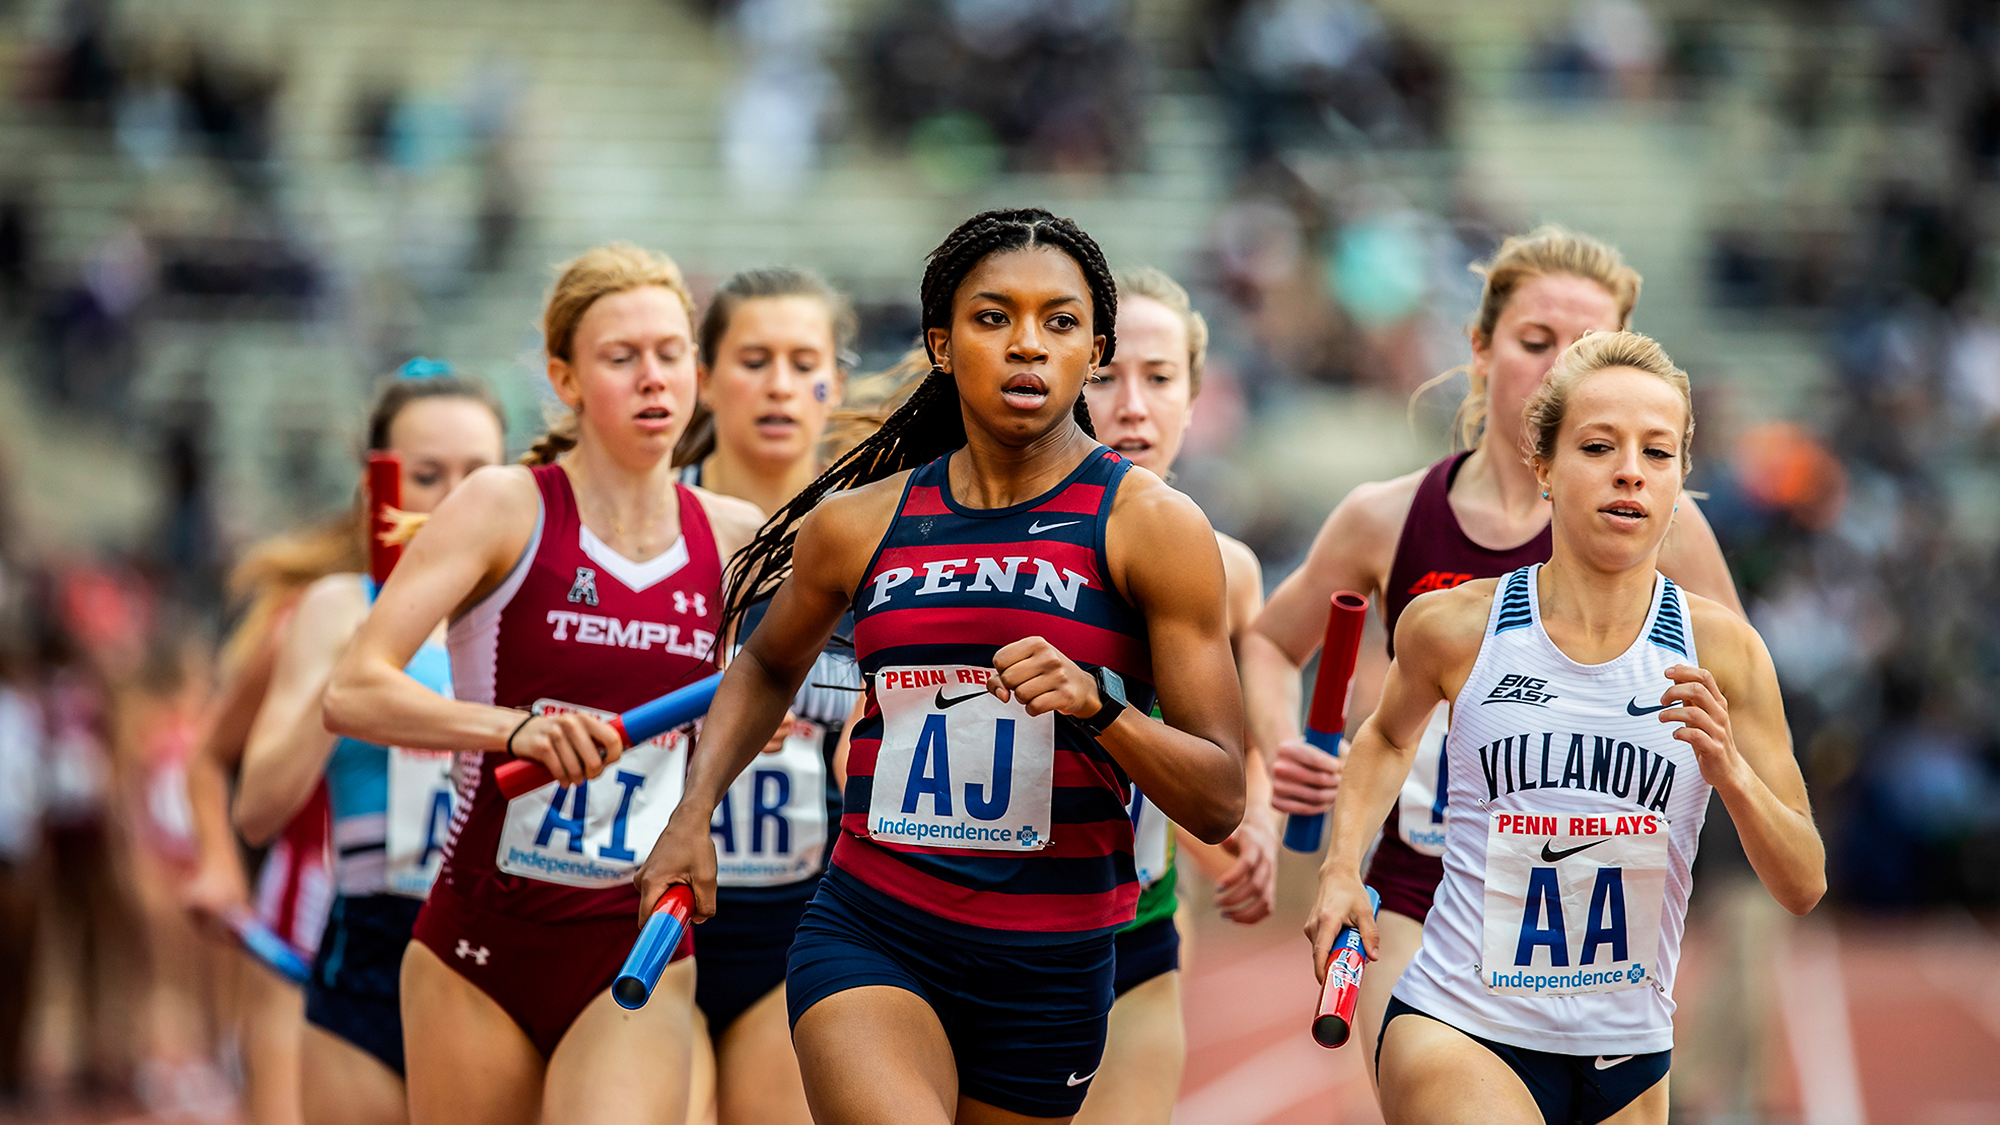 Nia Akins leads the pack during a race at the Penn Relays.